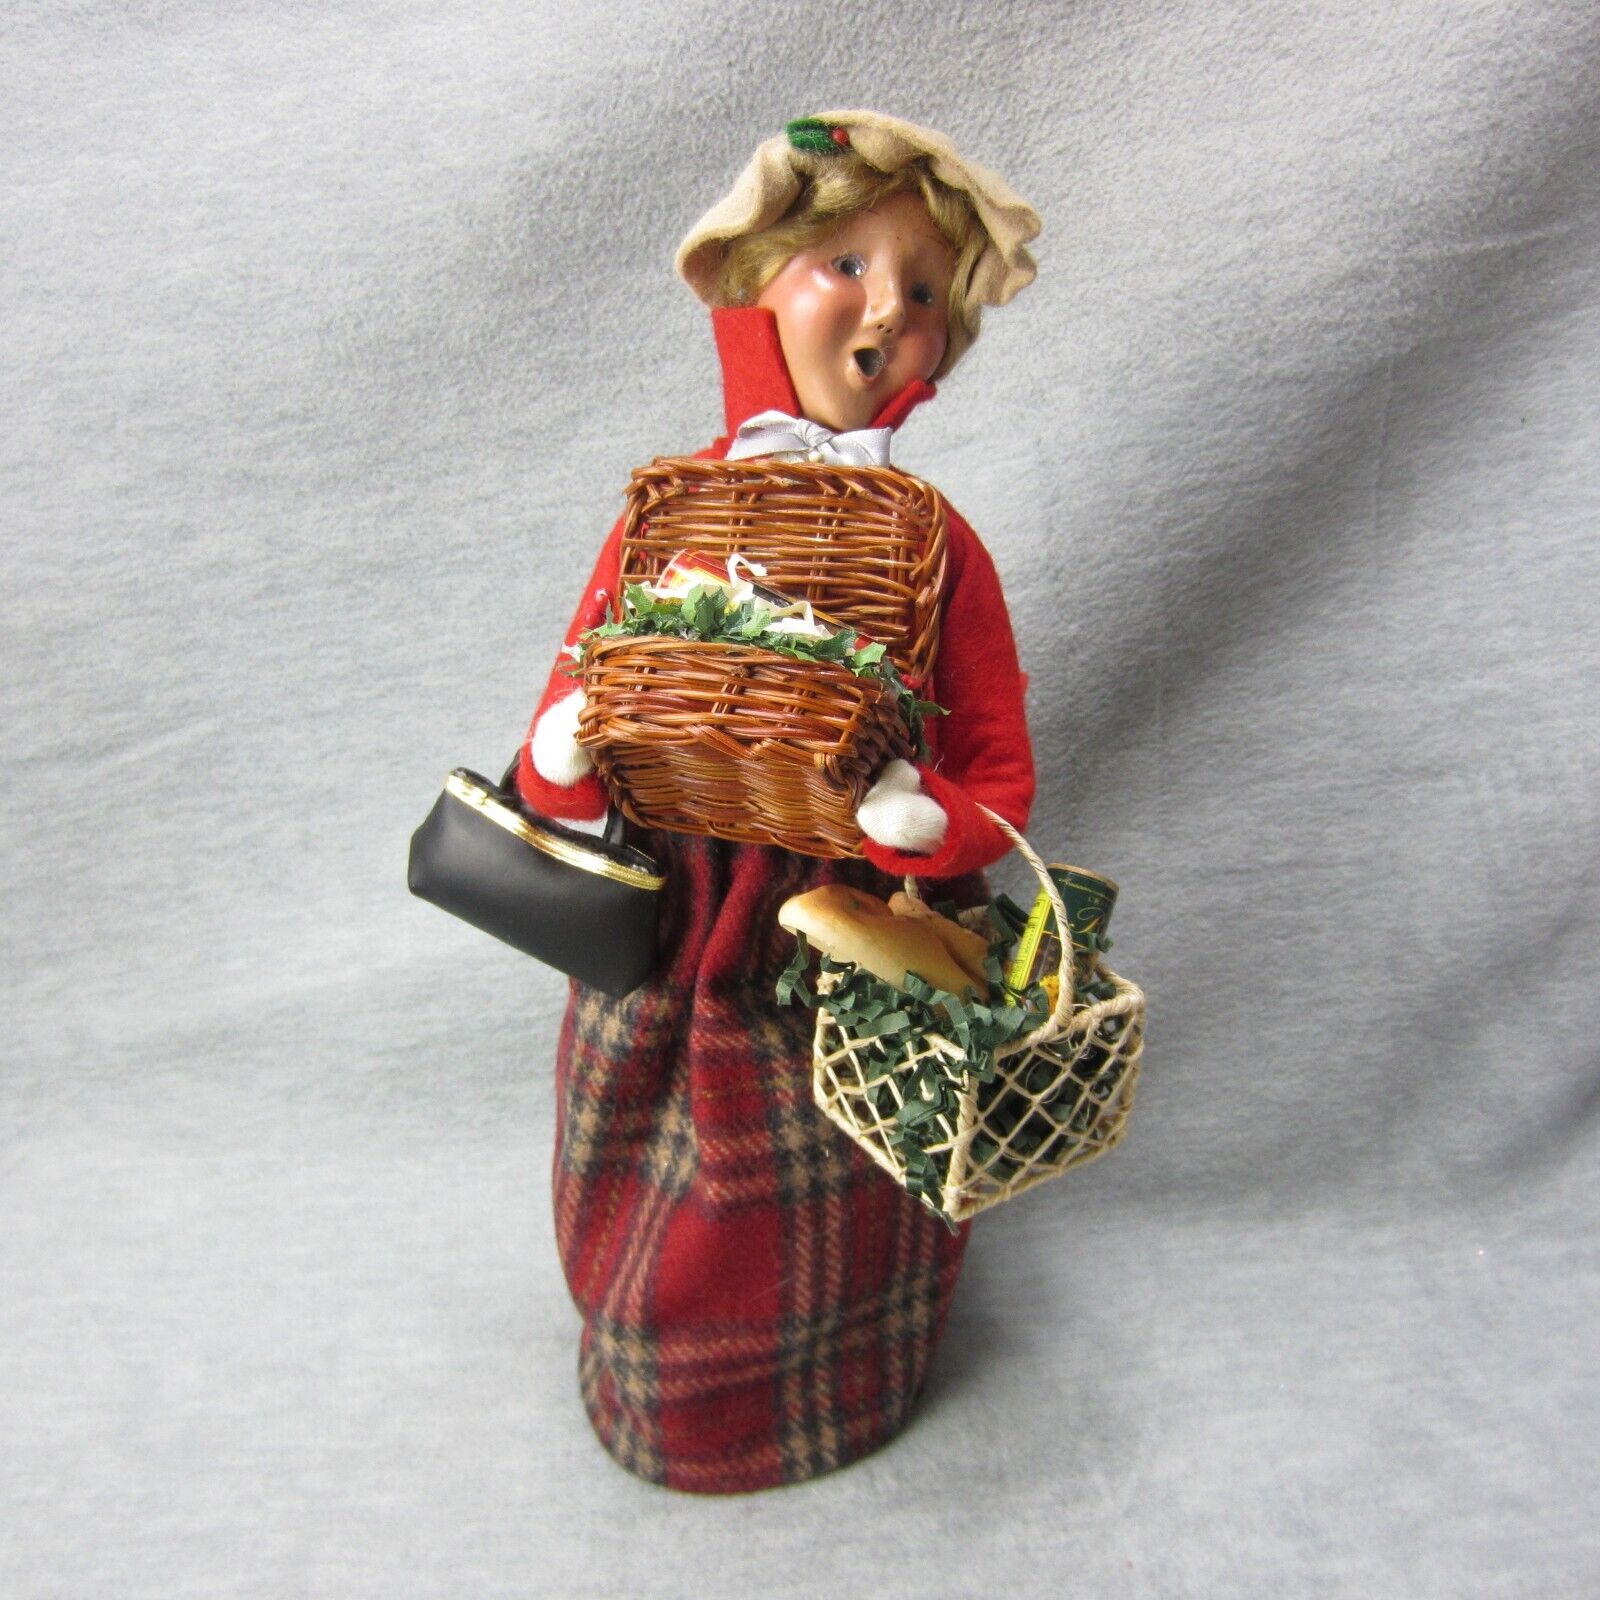 Vintage Byers Choice Chalfont Pa Traditional Buyer Caroler with Bread Basket